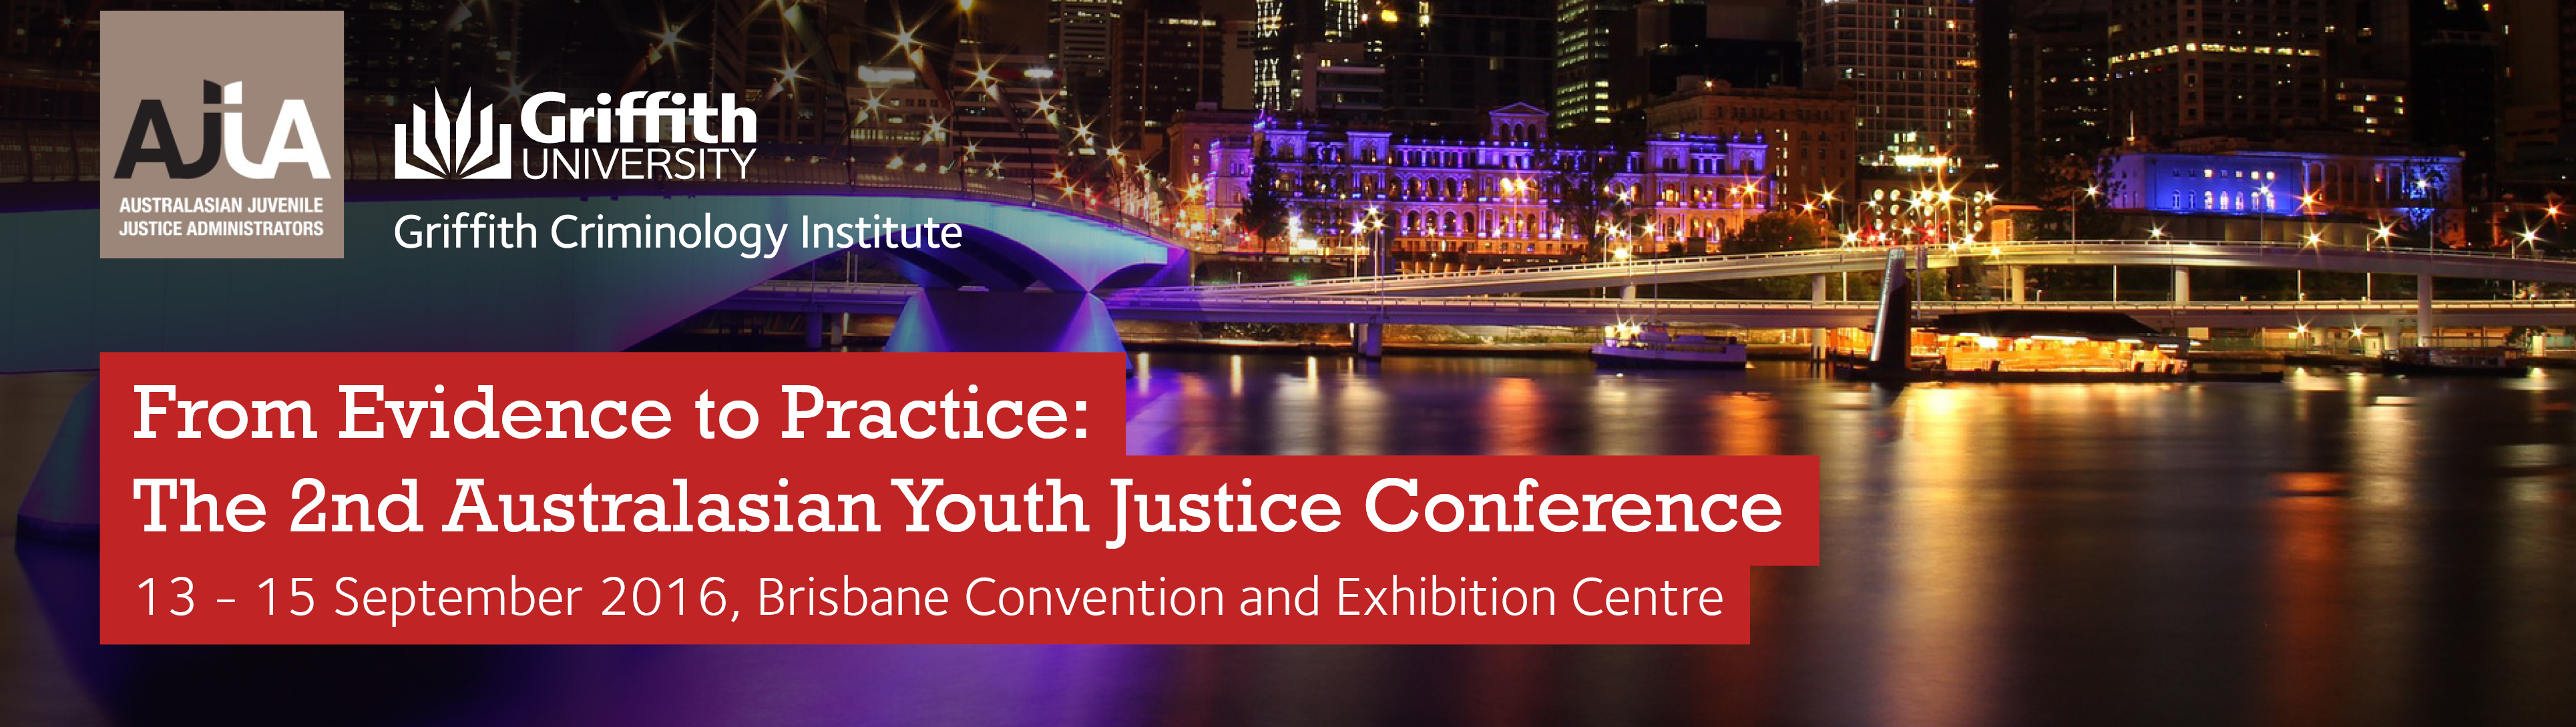 From Evidence to Practice: The 2nd Australasian Youth Justice Conference